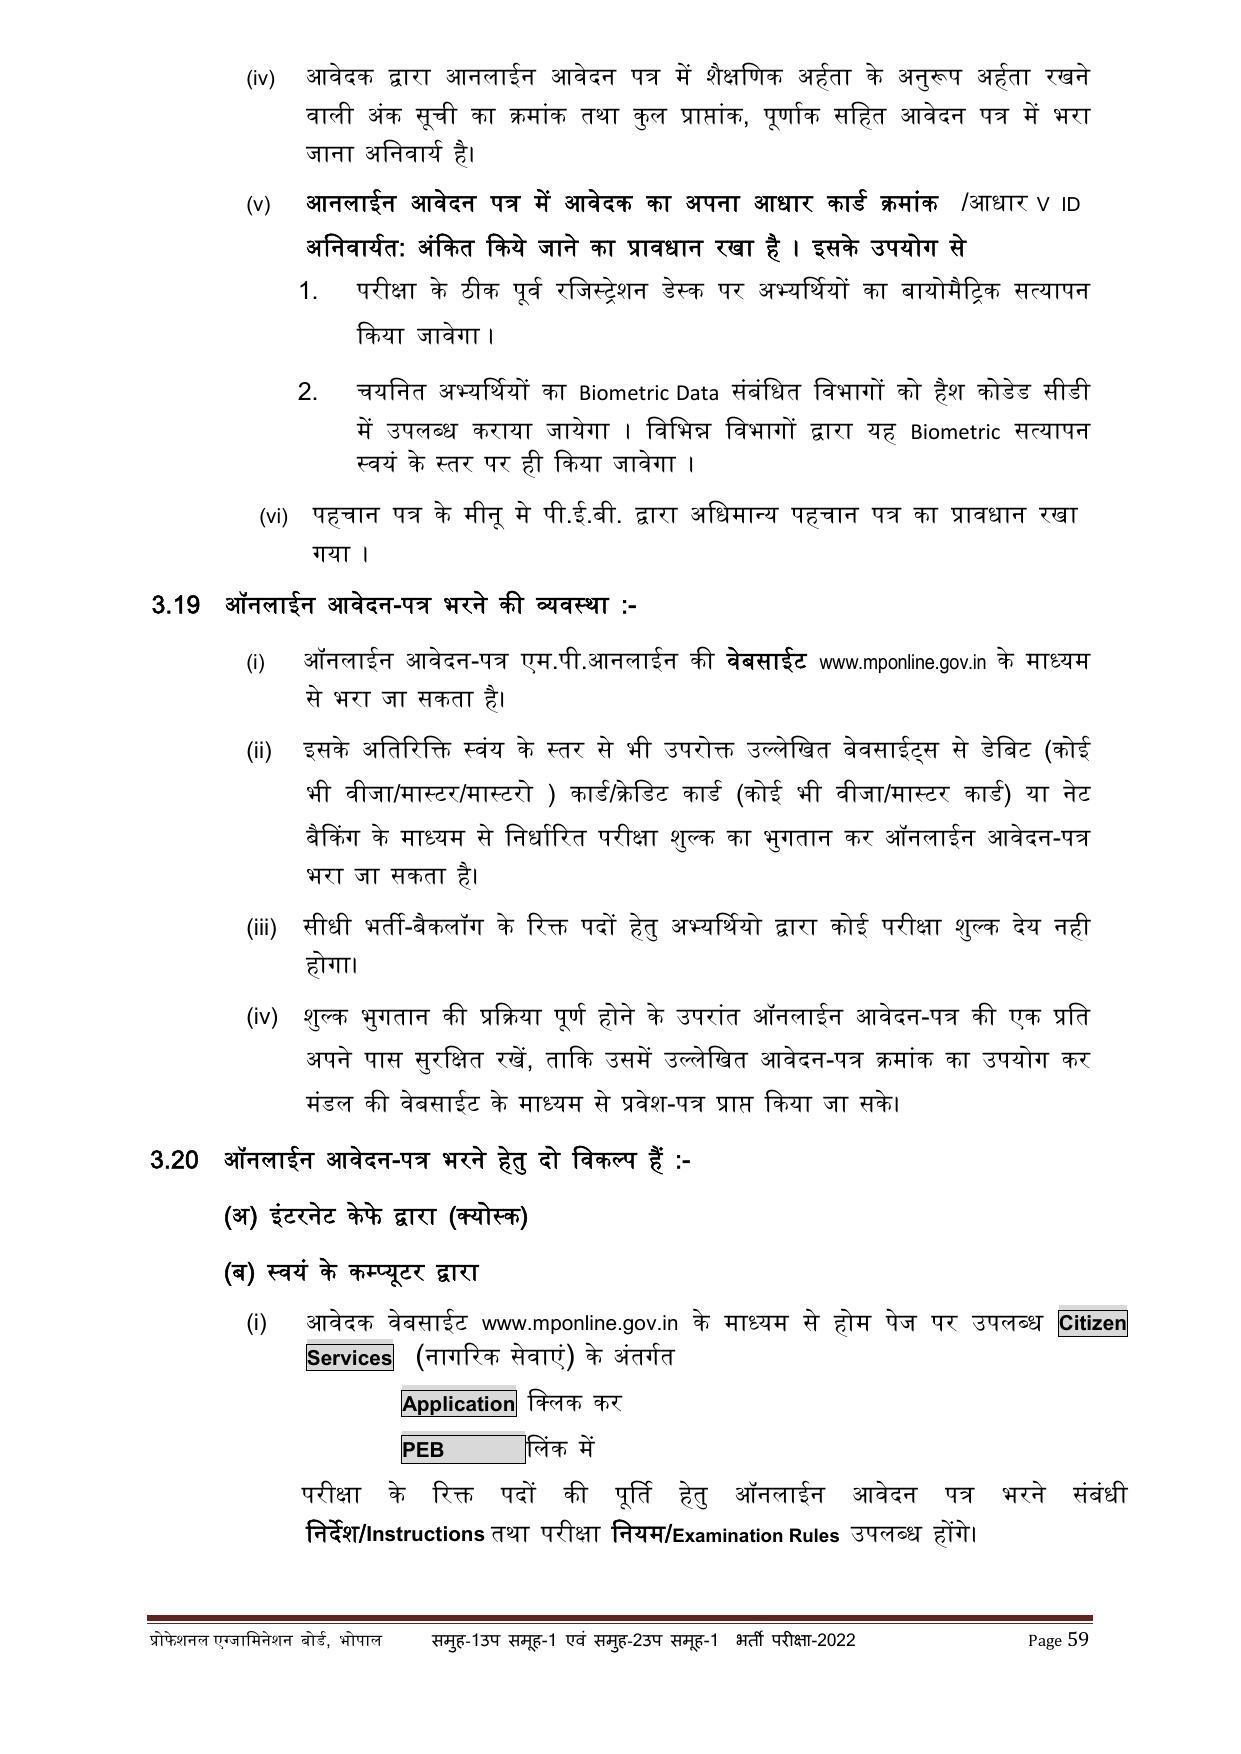 MPPEB Group-I Sub Group-I & Group-II Sub Group-I Recruitment 2022 - Page 56